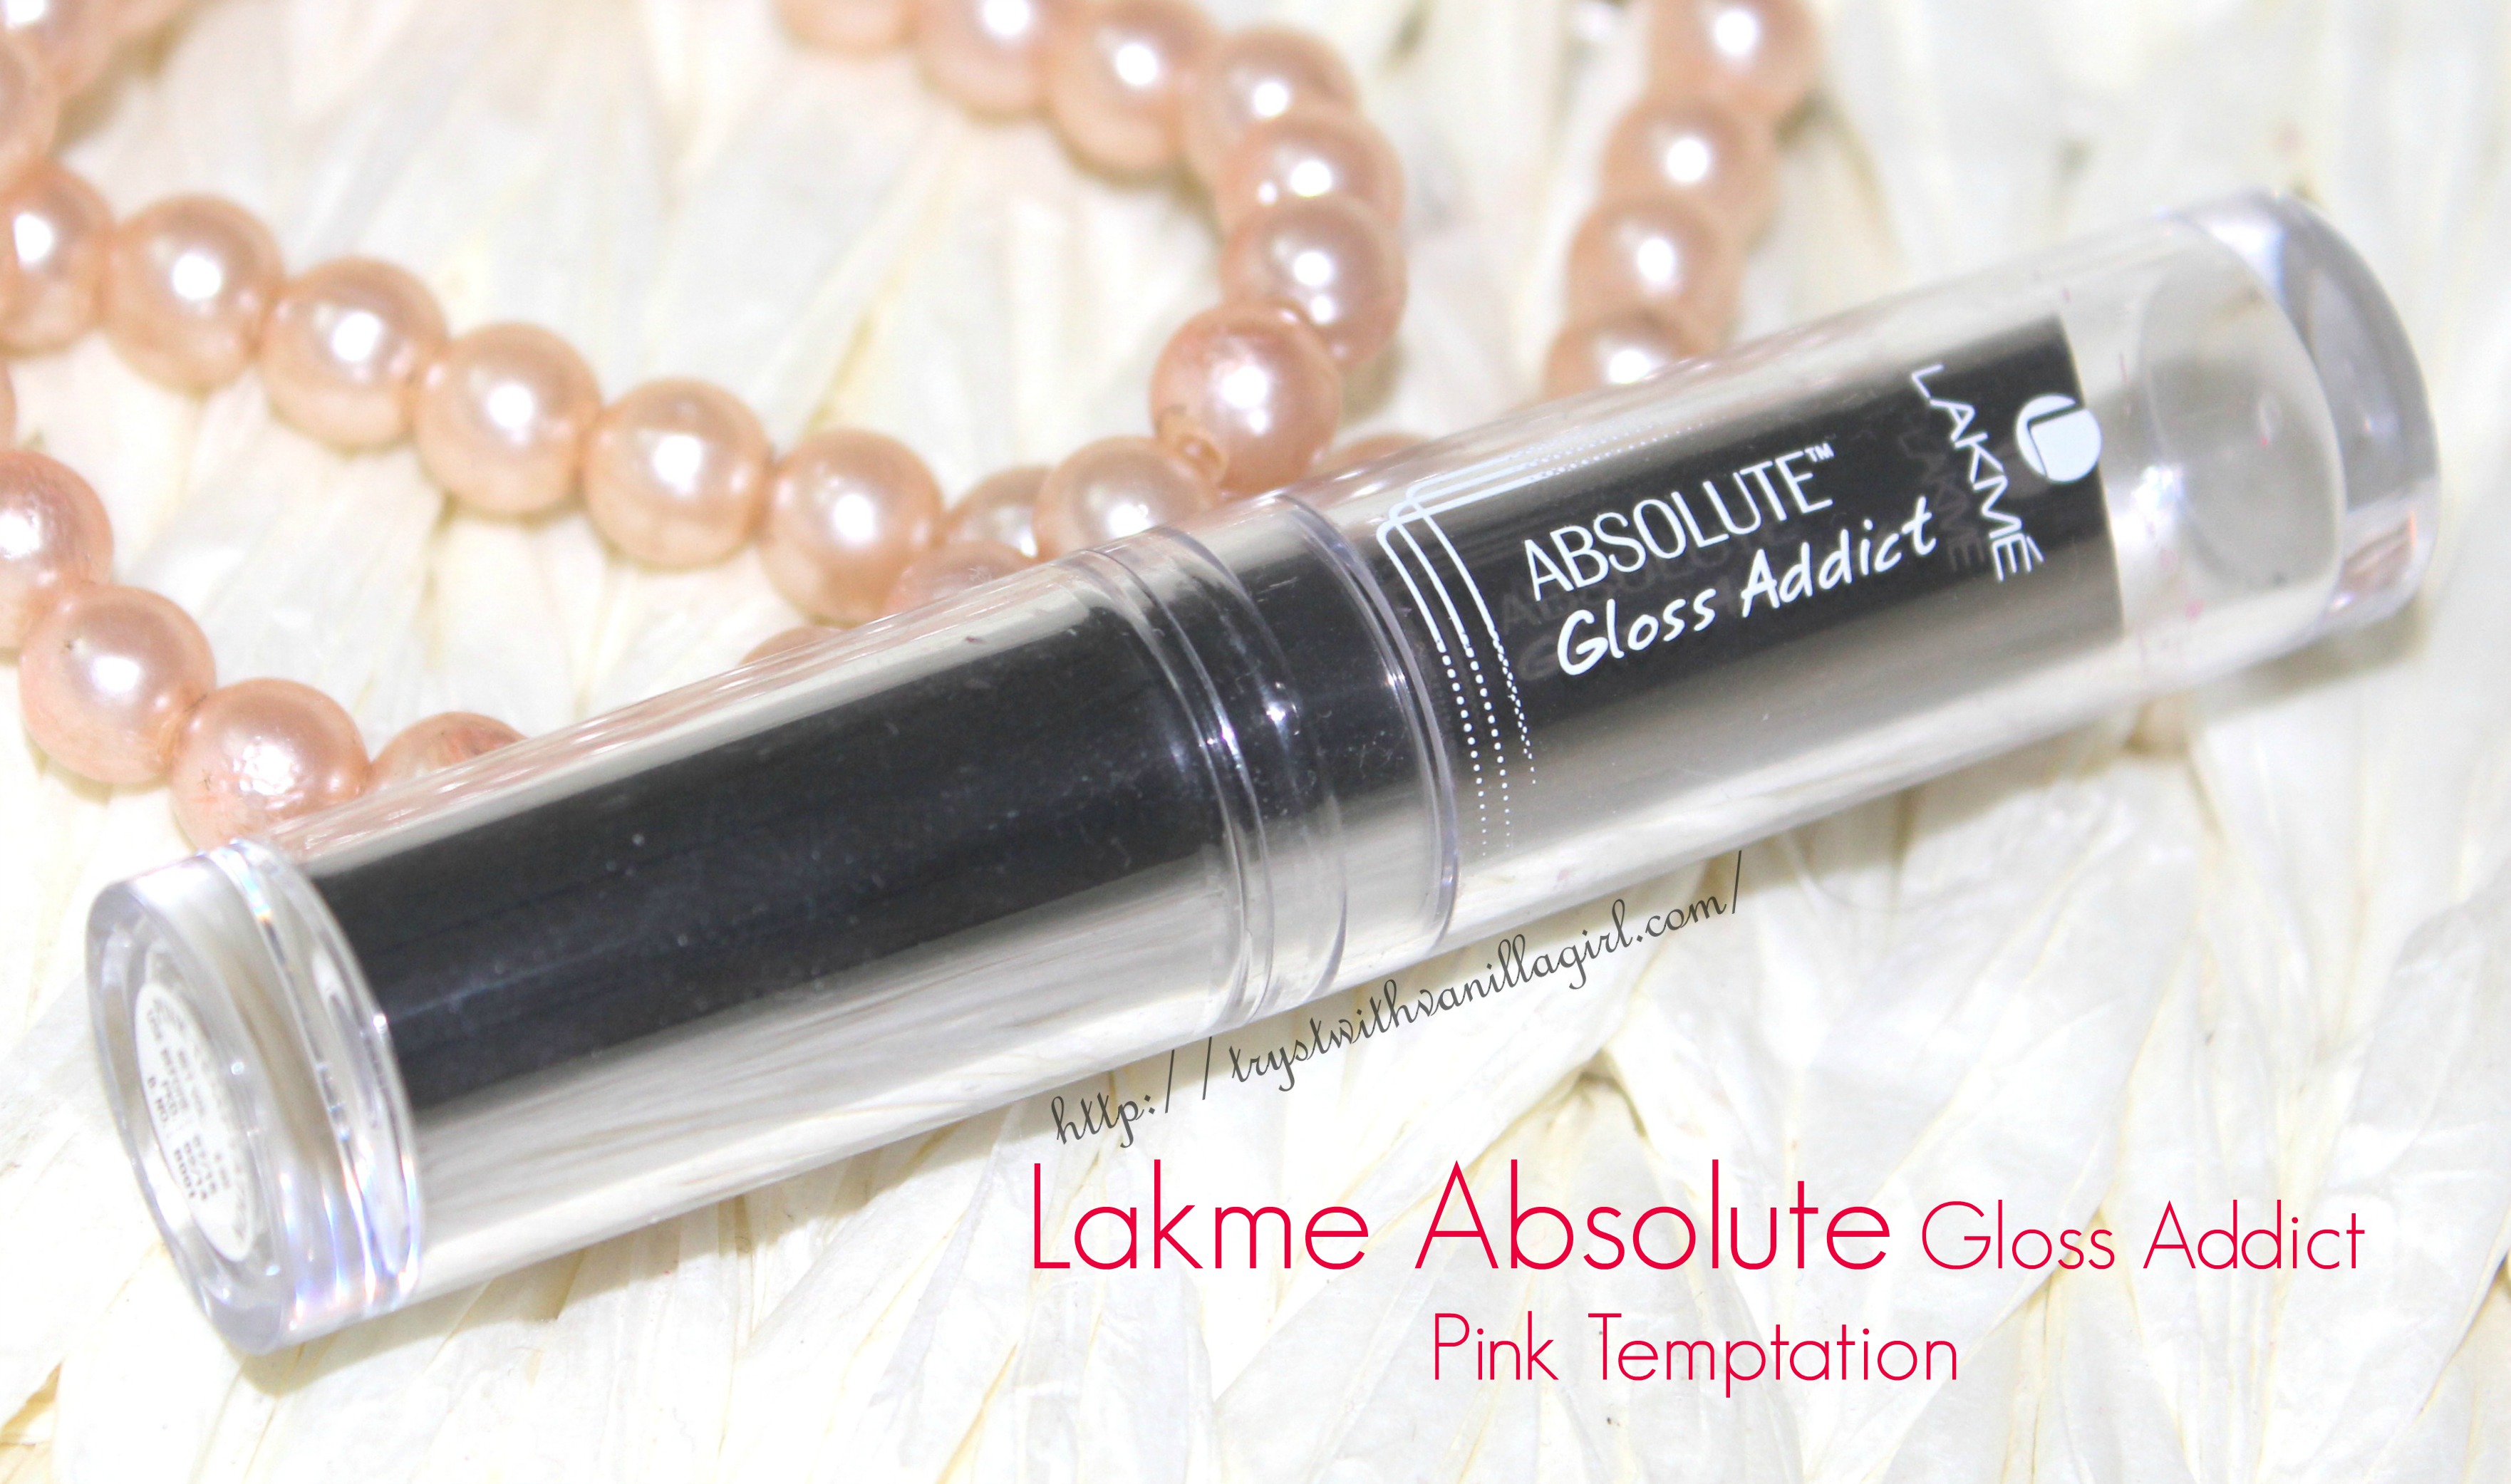 Lakme Absolute Gloss Addict Pink Temptation Review,Swatch,Photos